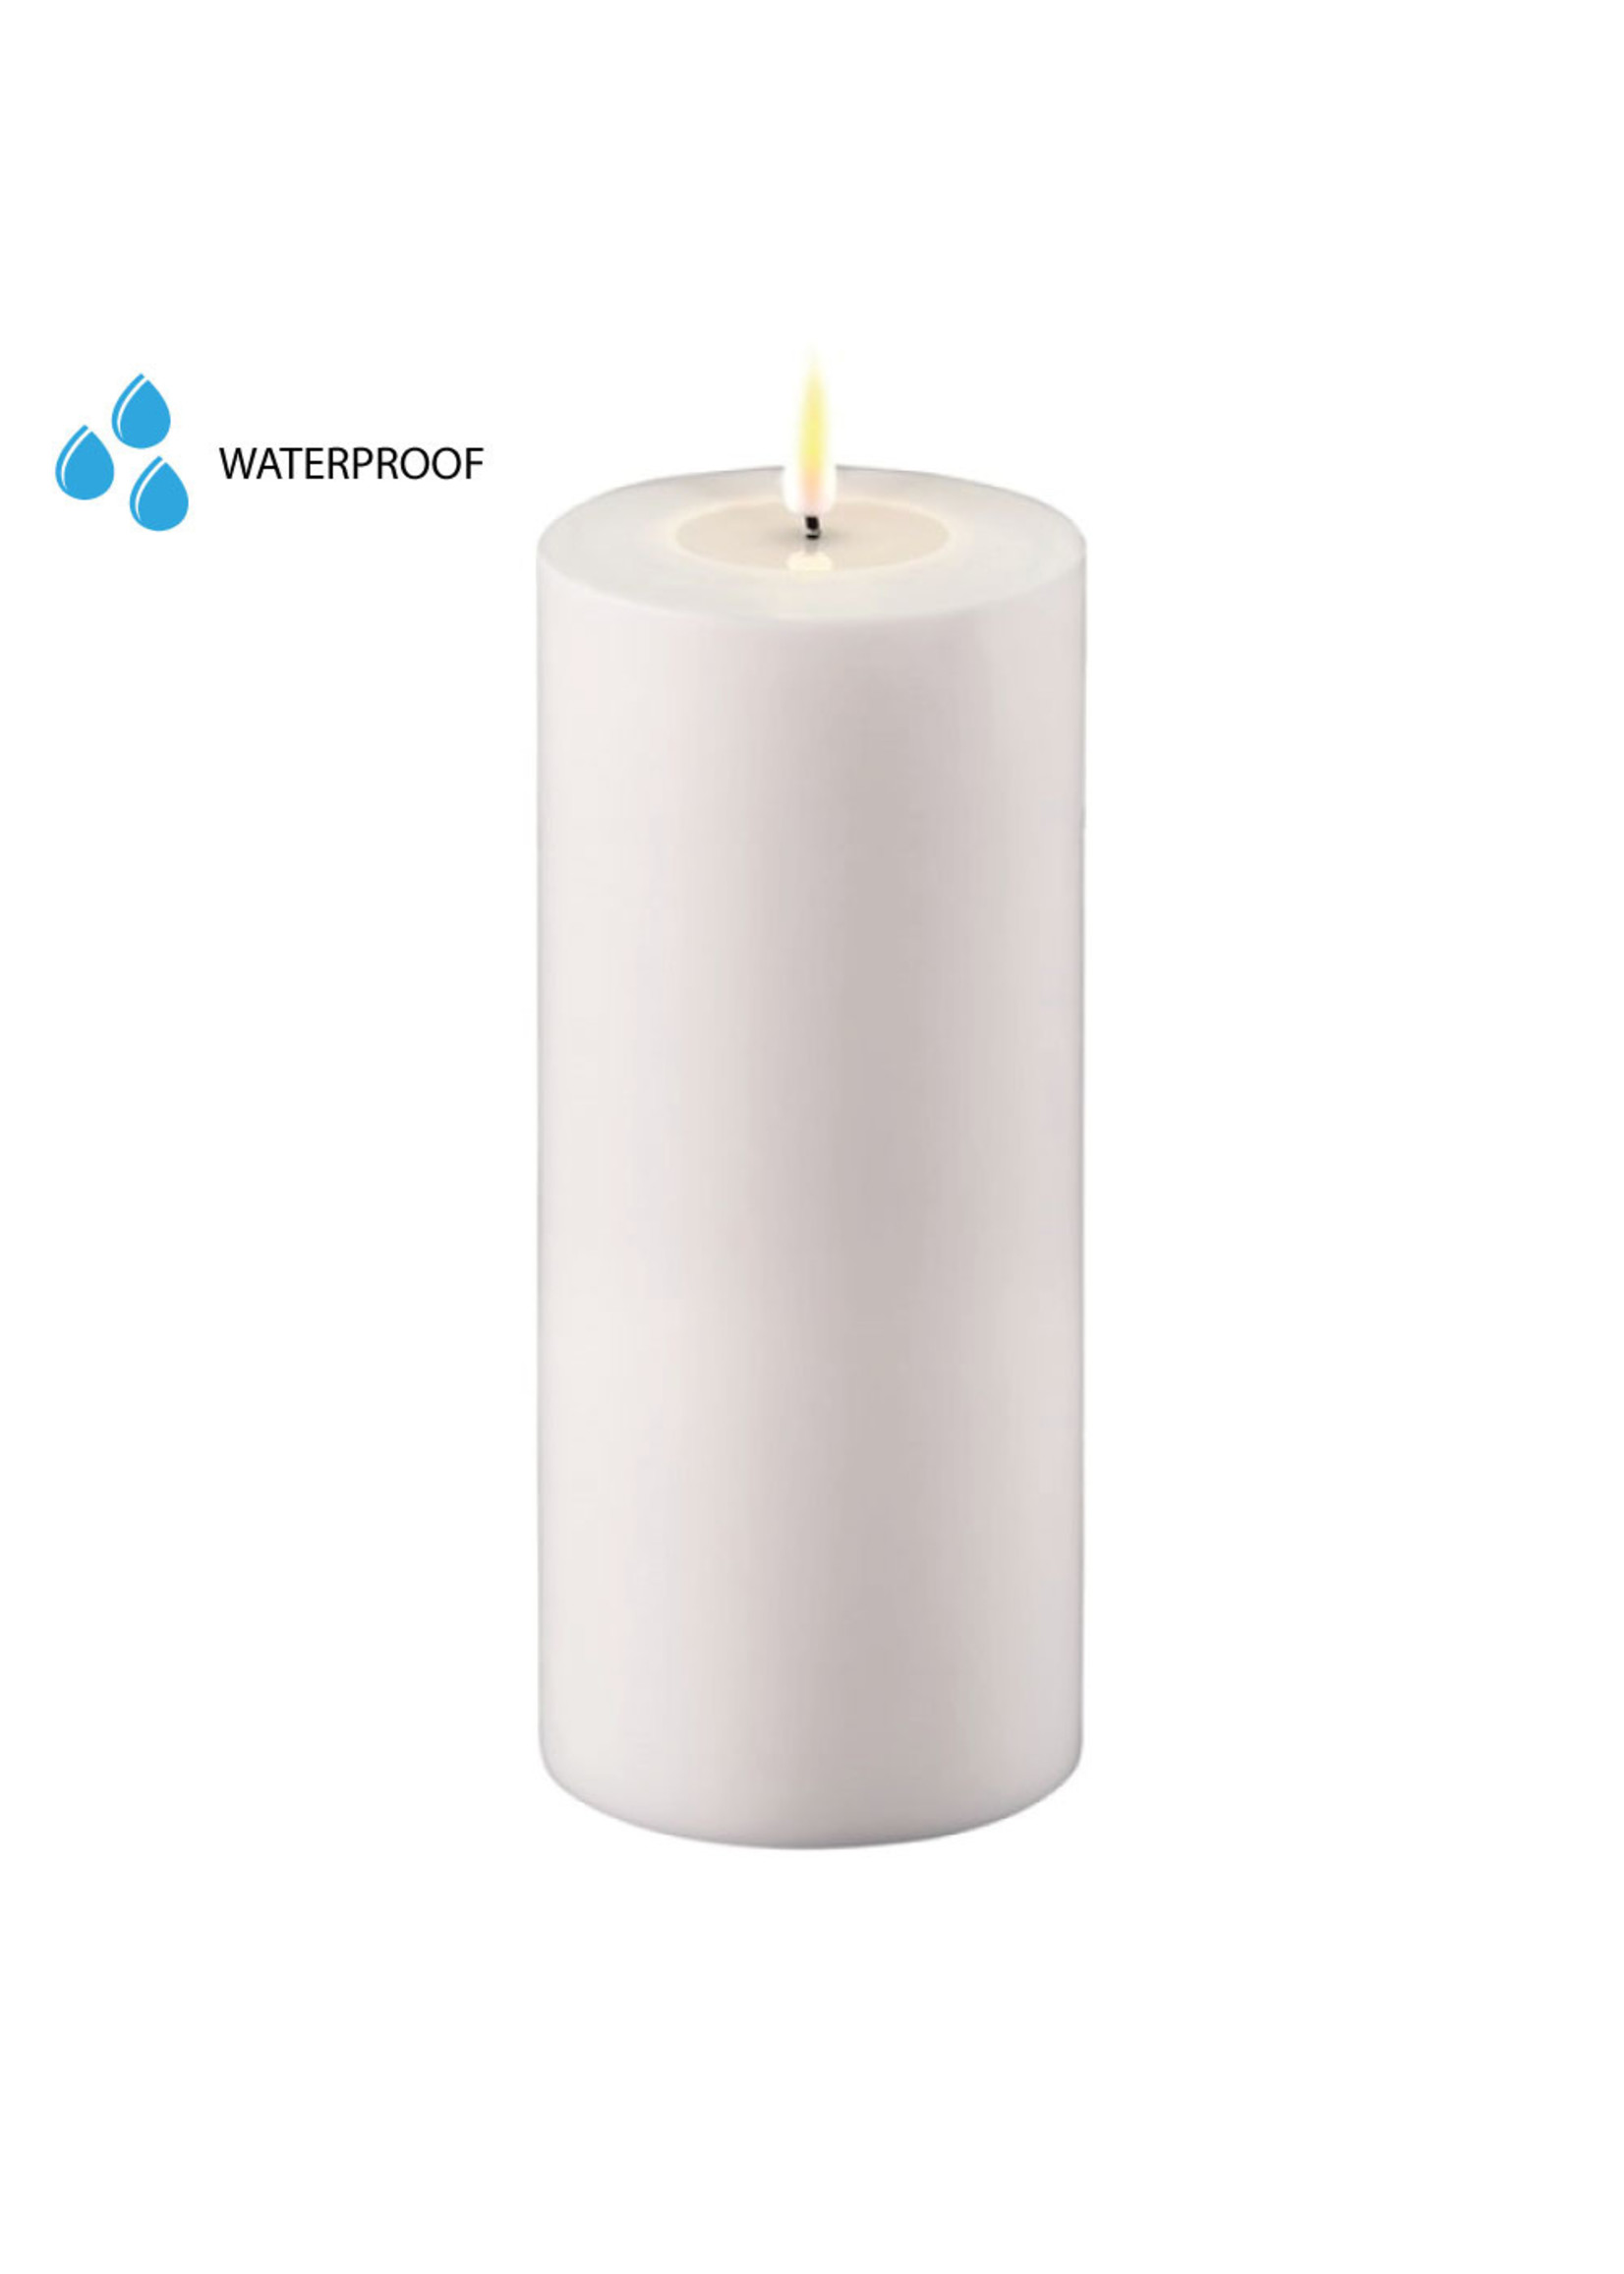 home art de luxe DELUXE HOMEART LED CANDLE REAL FLAME WHITE Ø7.5CM x 15CM OUTDOOR DELUXE HOMEART LED CANDLE REAL FLAME WHITE Ø7.5CM x 15CM OUTDOO